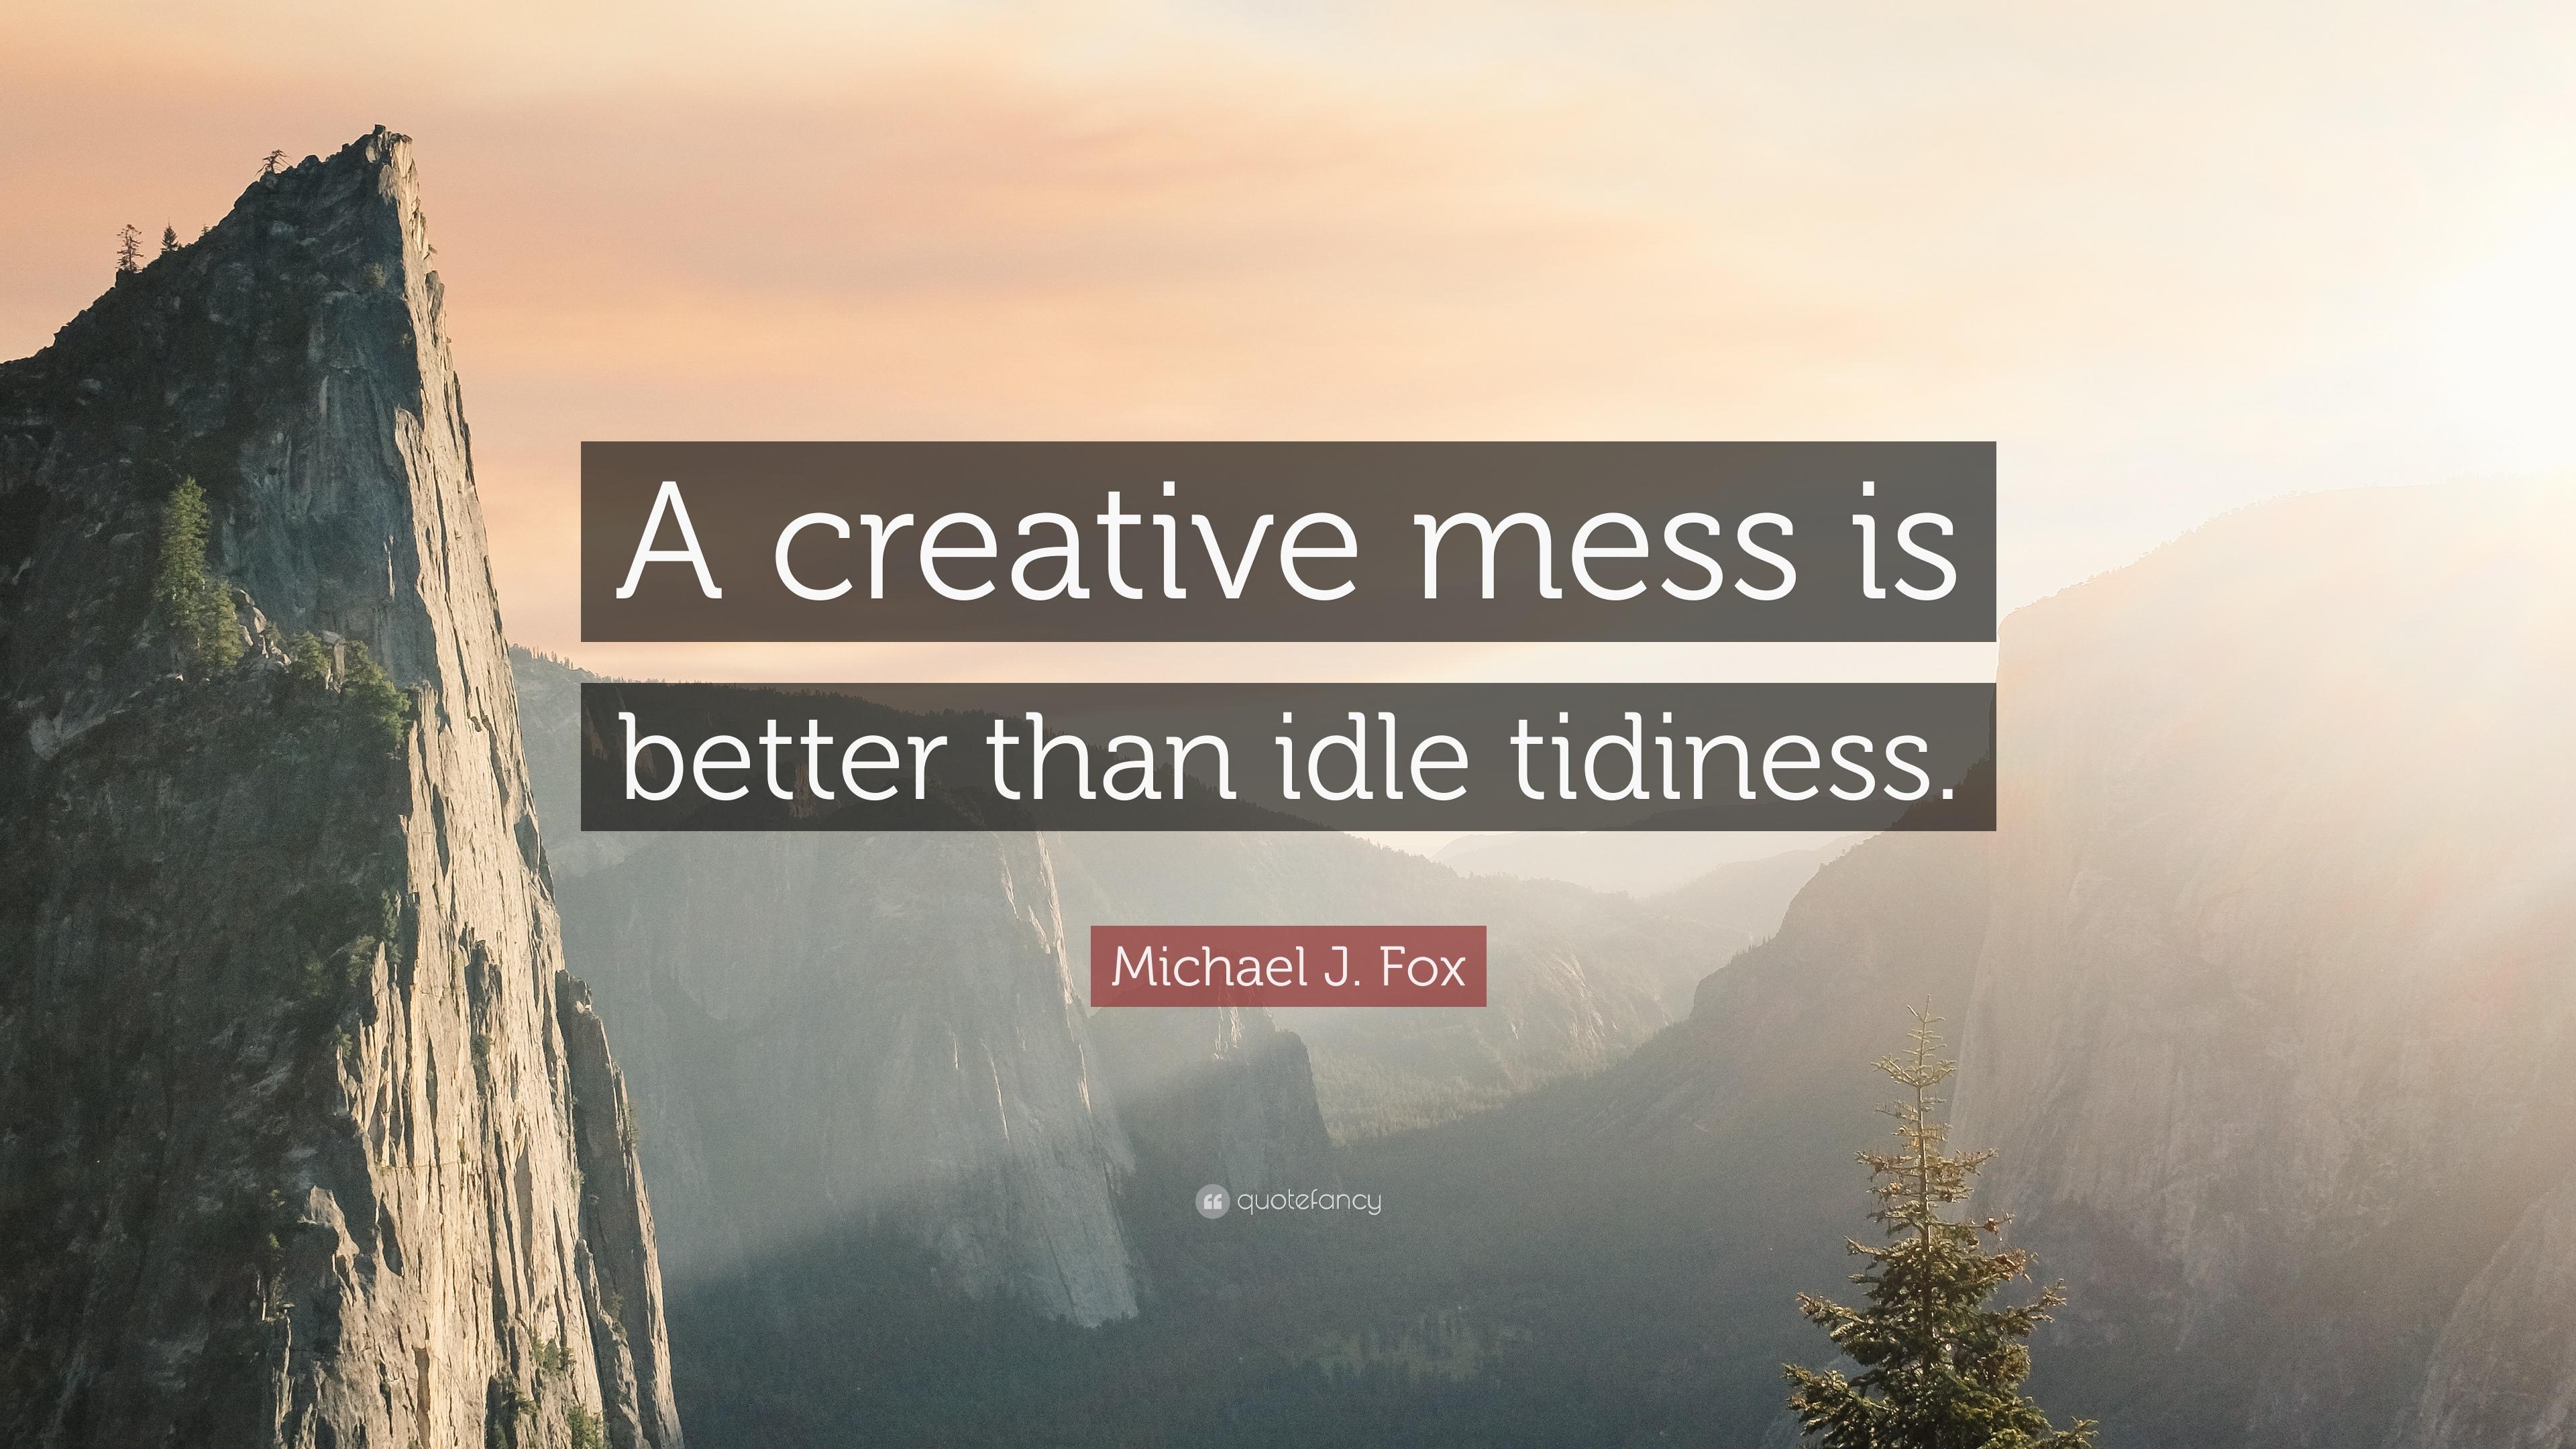 Michael J. Fox Quote: “A creative mess is better than idle